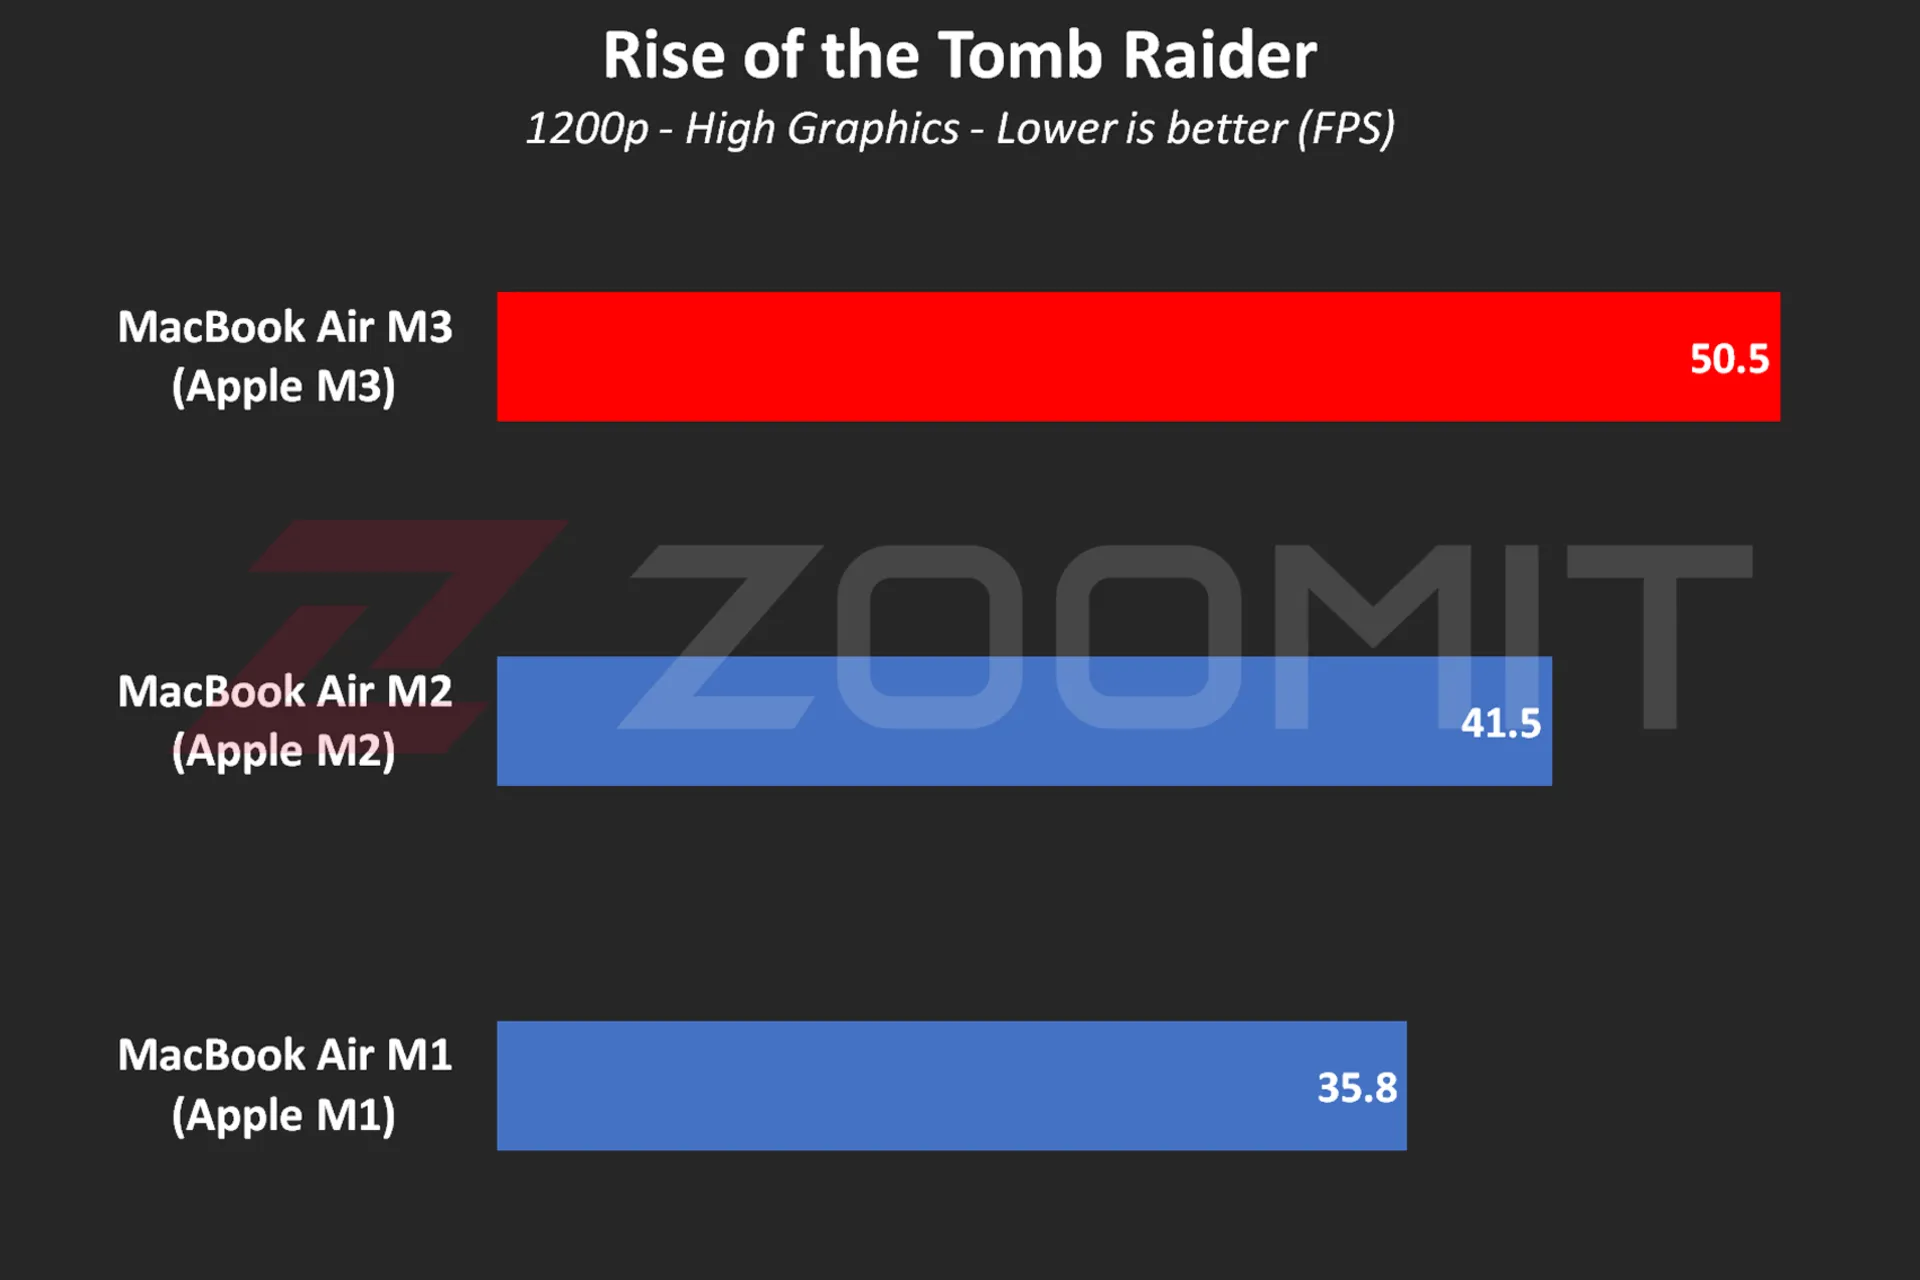 MacBook Air M3 performance in the game Rise of the Tomb Raider